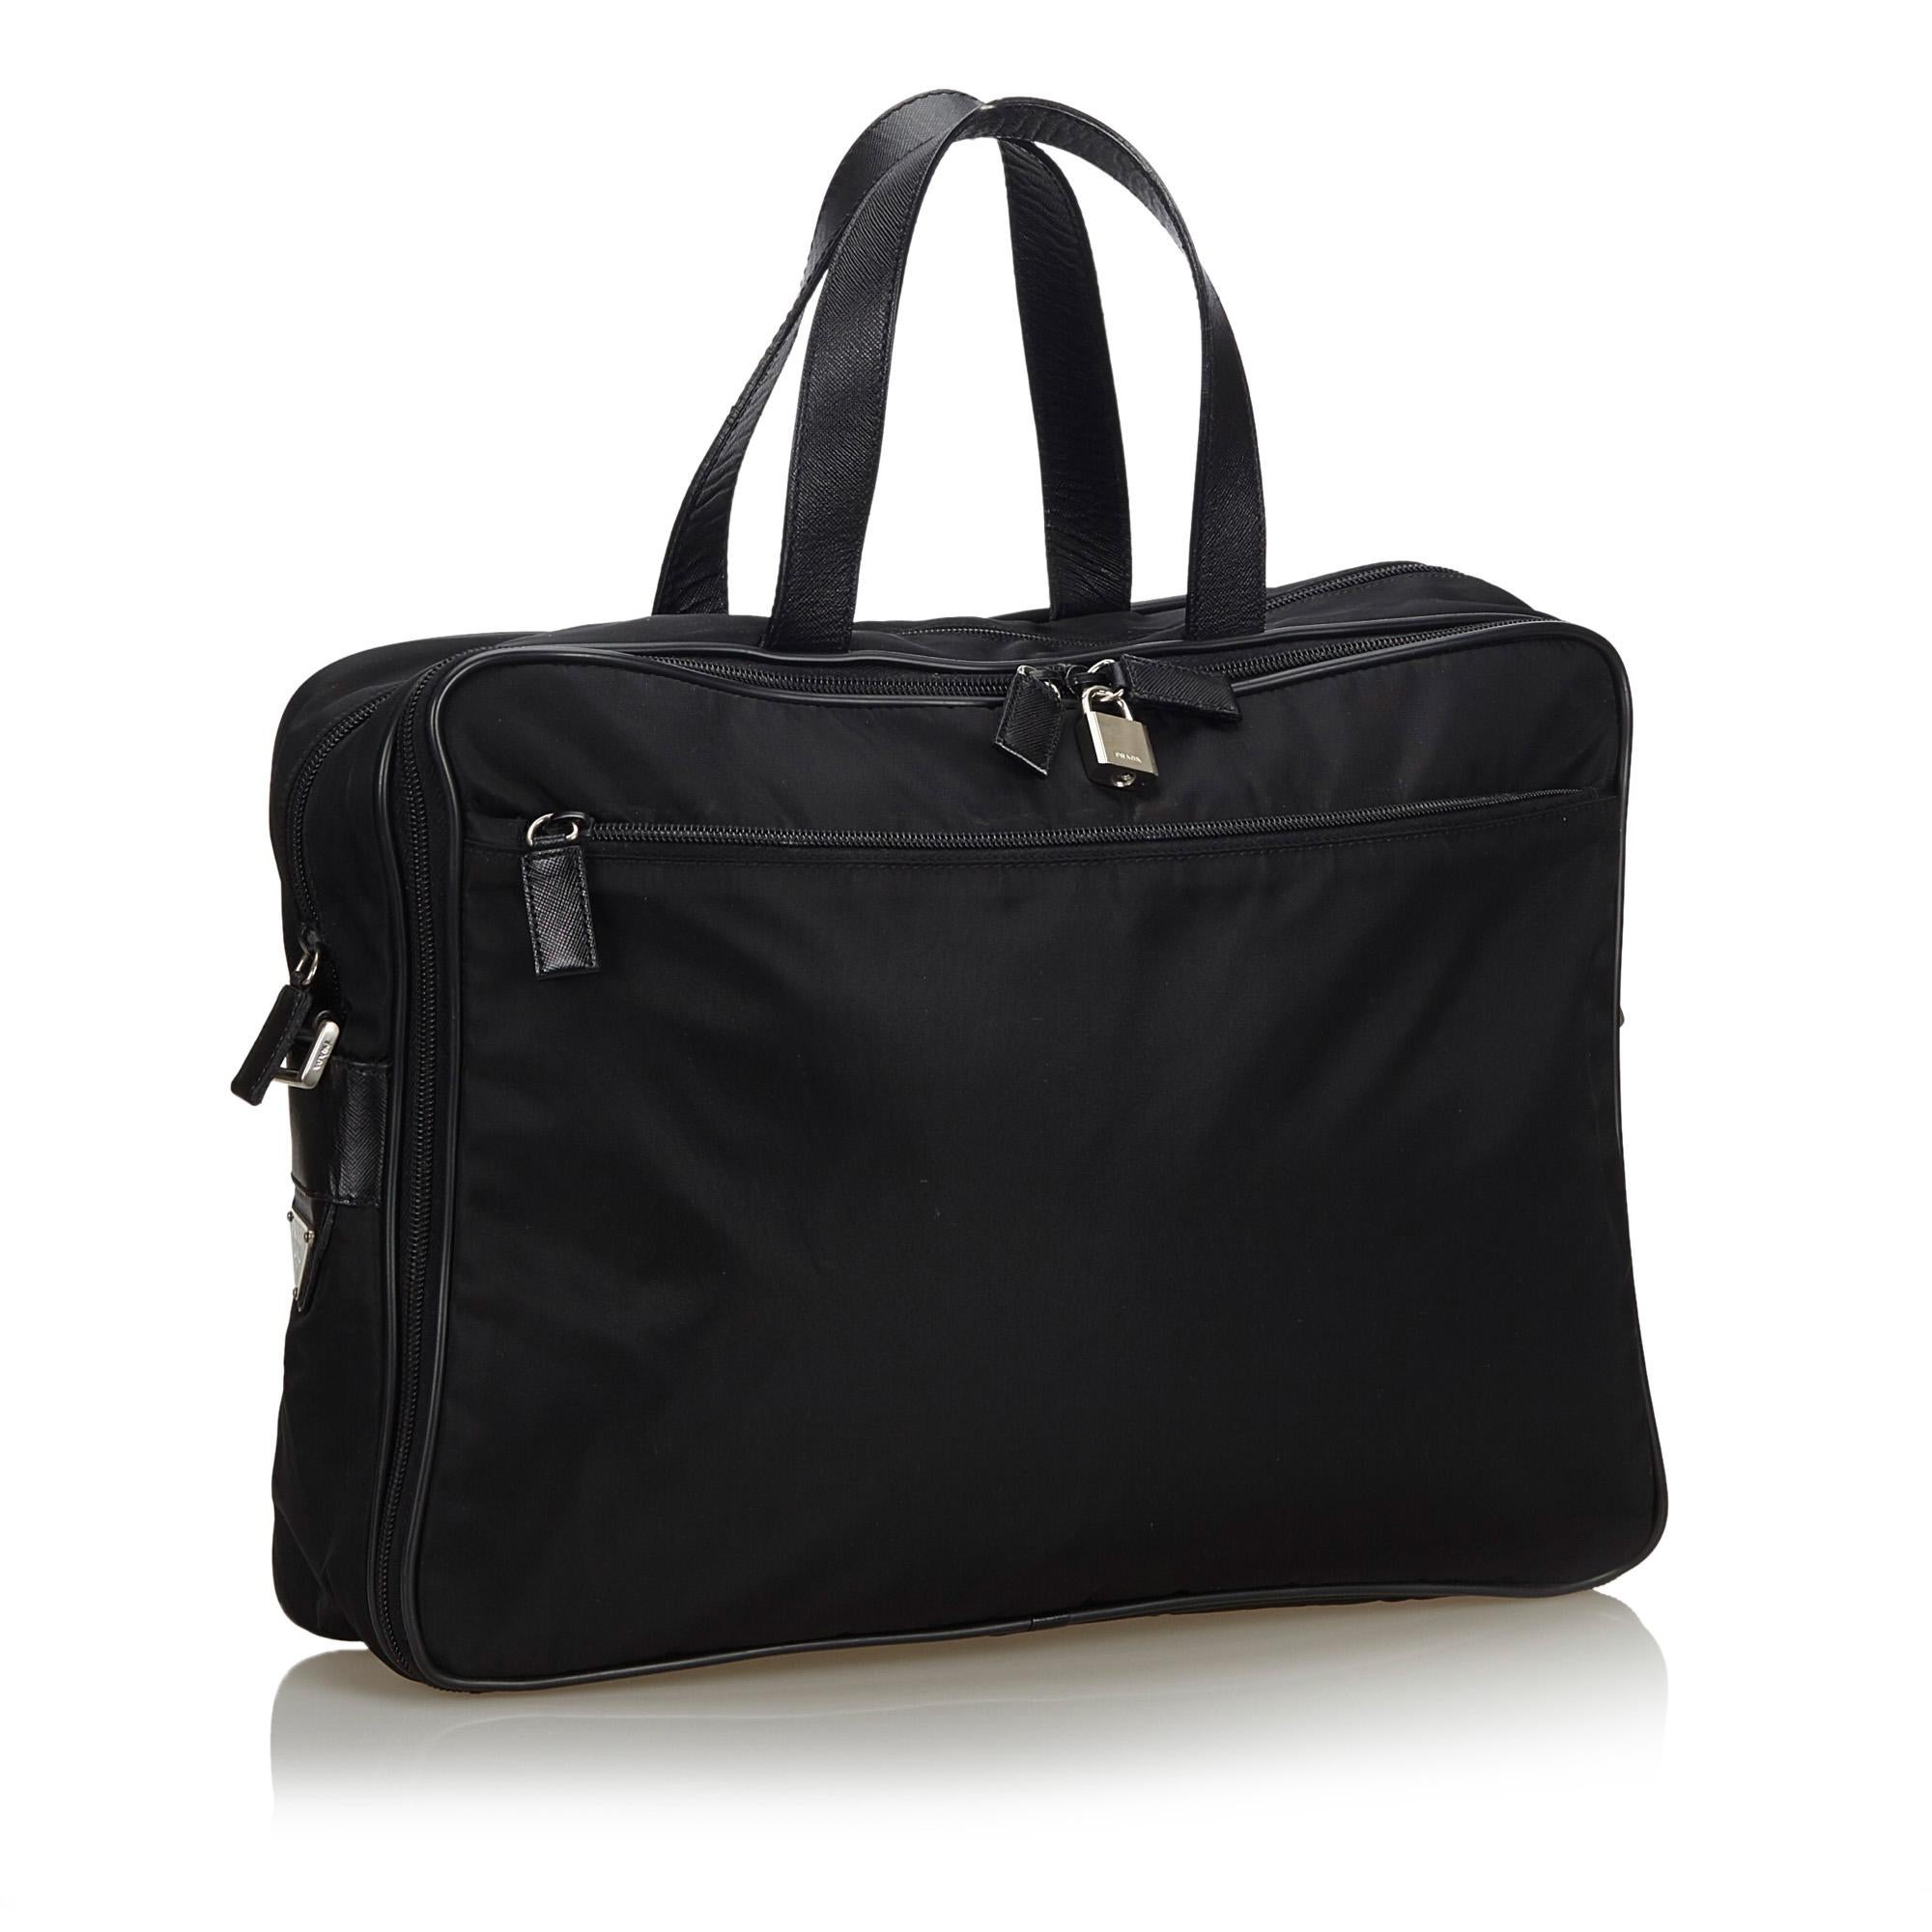 This business bag features a nylon body with leather trim, a front exterior zip pocket, flat leather top handles, a detachable flat strap, a 2 way top zip closure, and an interior zip pocket. It carries as B+ condition rating.

Inclusions: